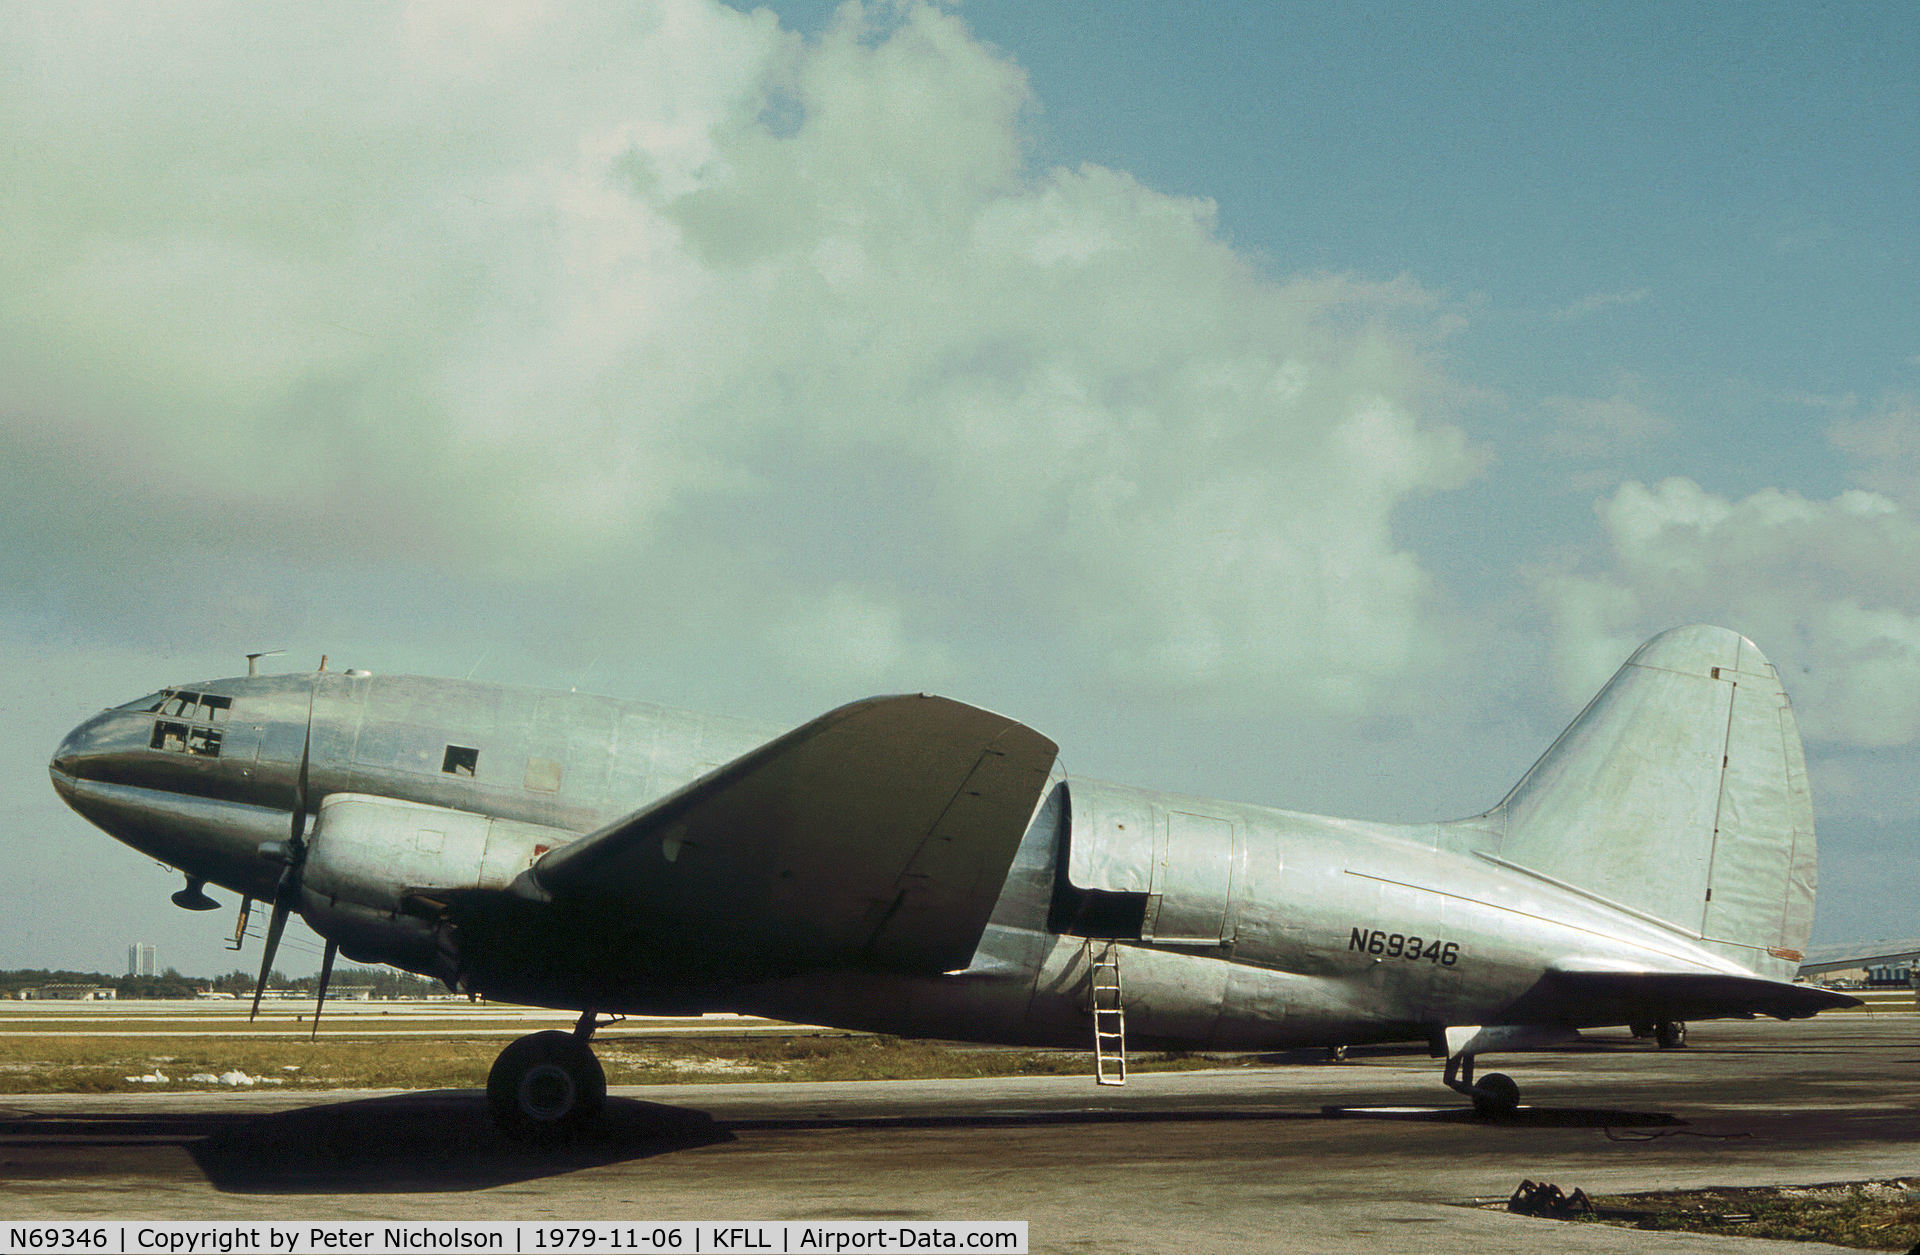 N69346, 1944 Curtiss C-46F Commando C/N 22401, C-46F Commando ex 44-78578 as seen at Fort Lauderdale in November 1979.